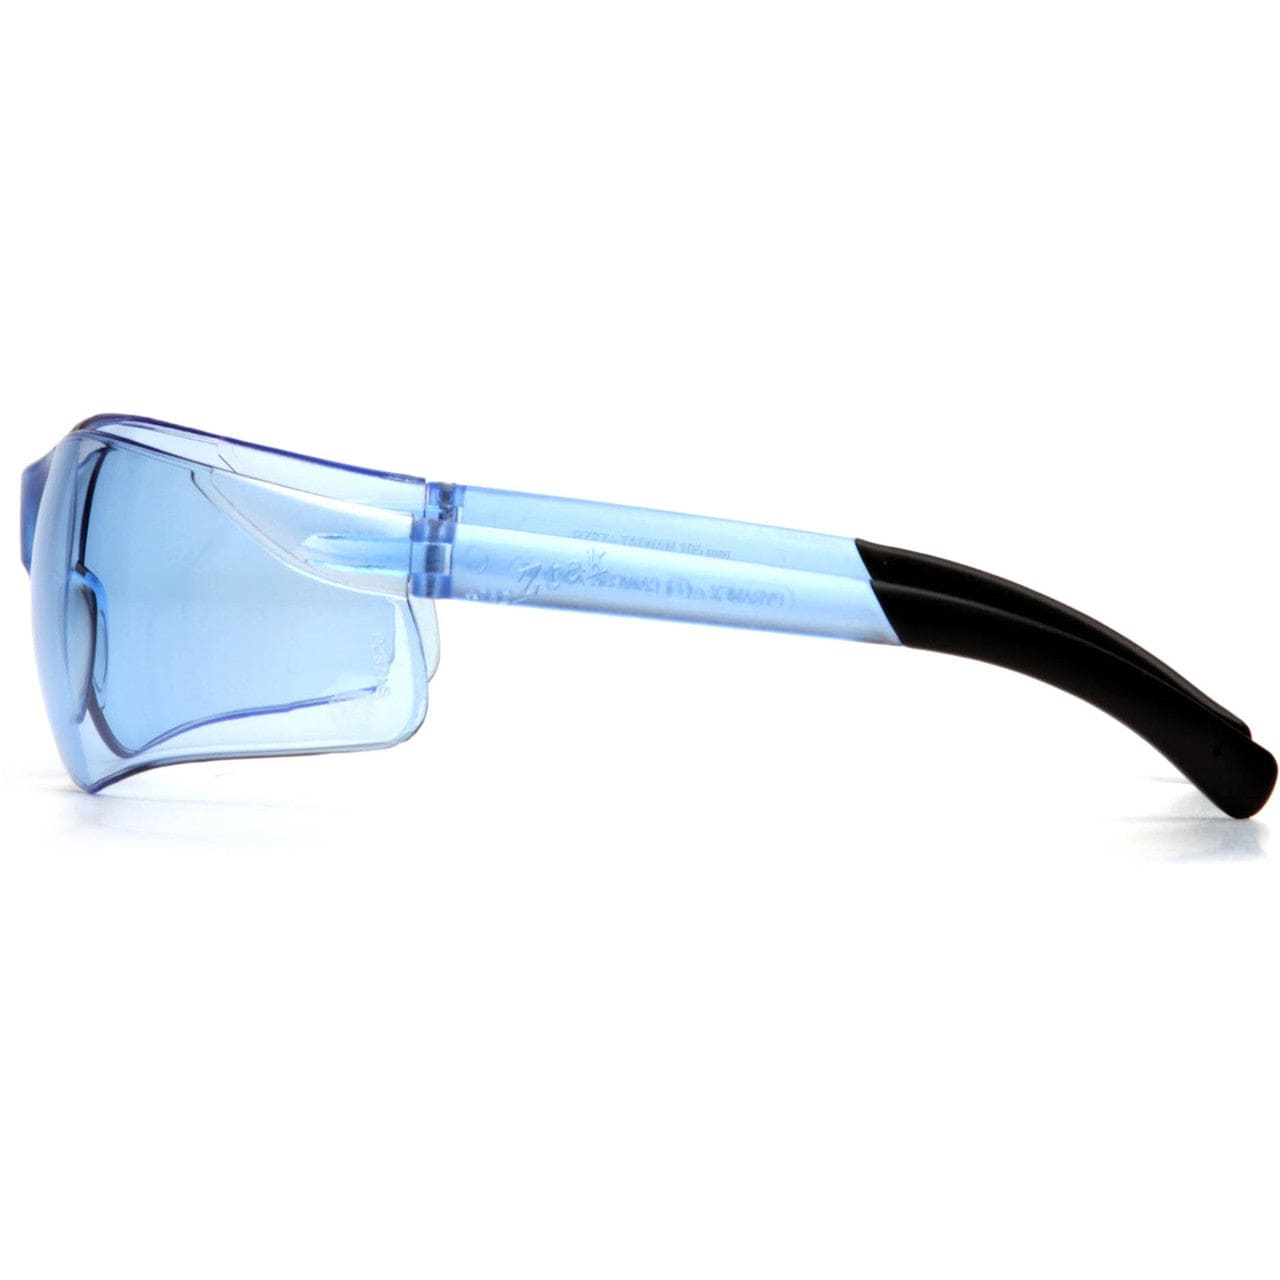 Pyramex Mini Ztek Safety Glasses with Infinity Blue Lens S2560SN Side View